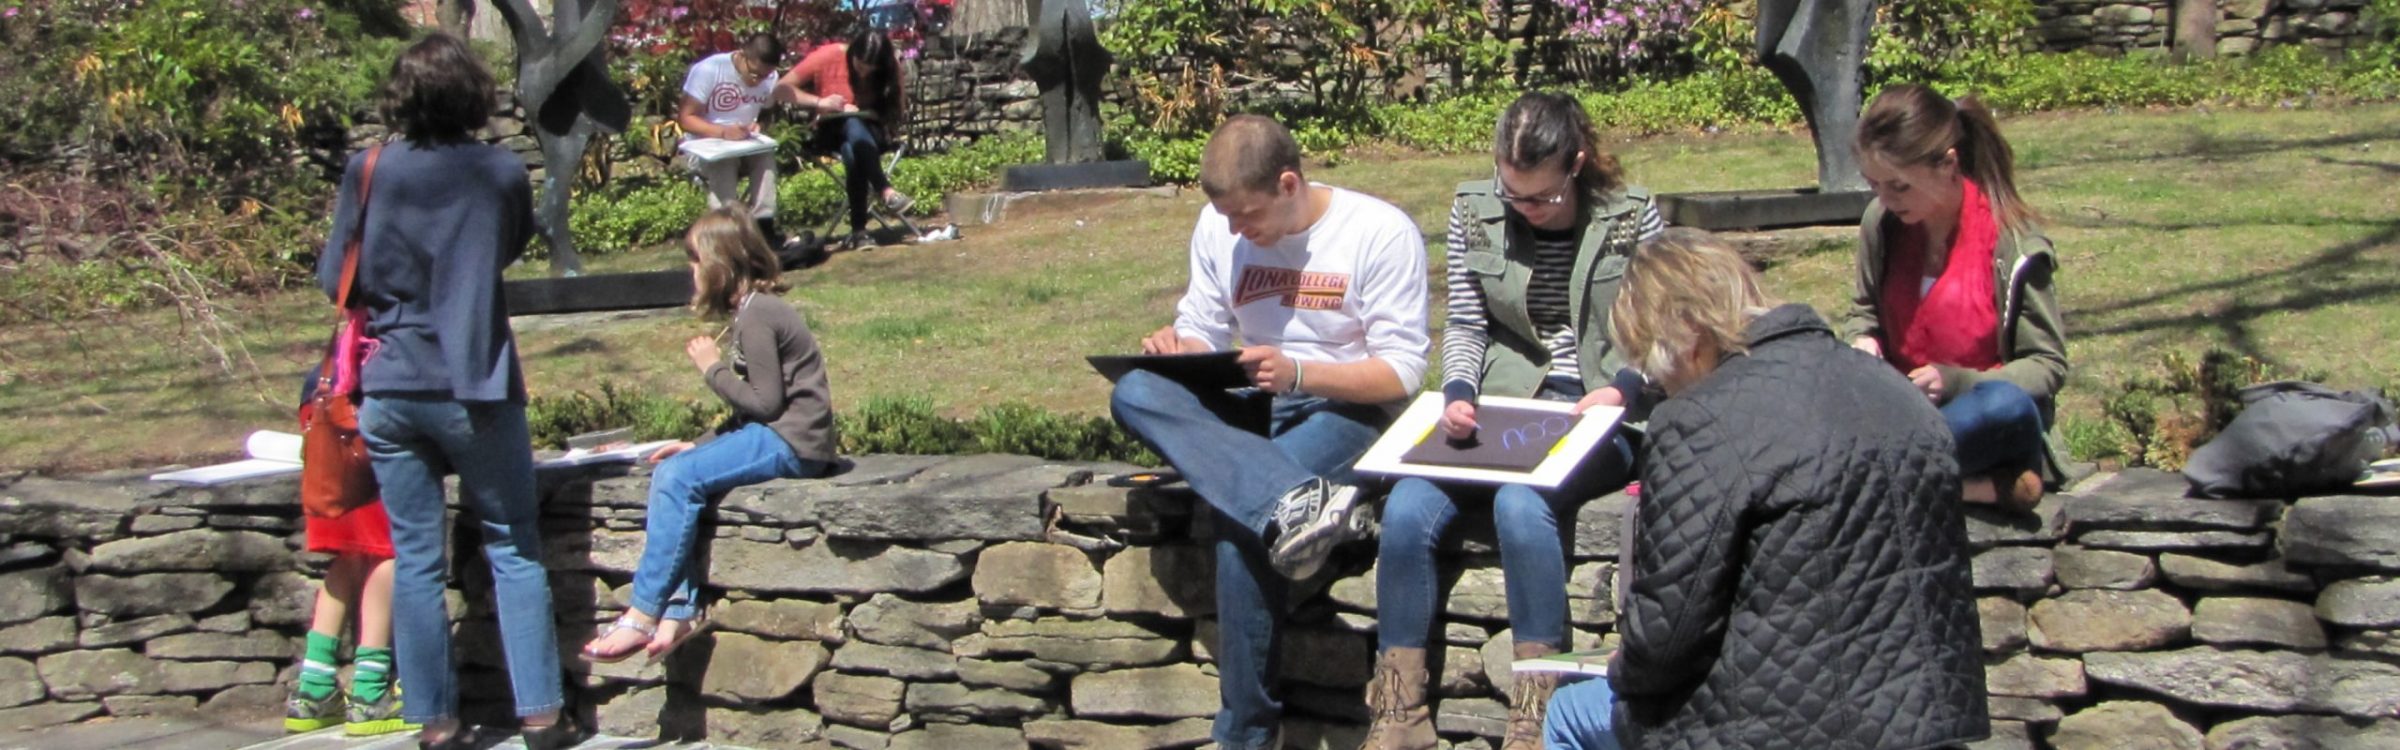 Image of families sitting on a stone wall and drawing together outside of The Benton Museum.